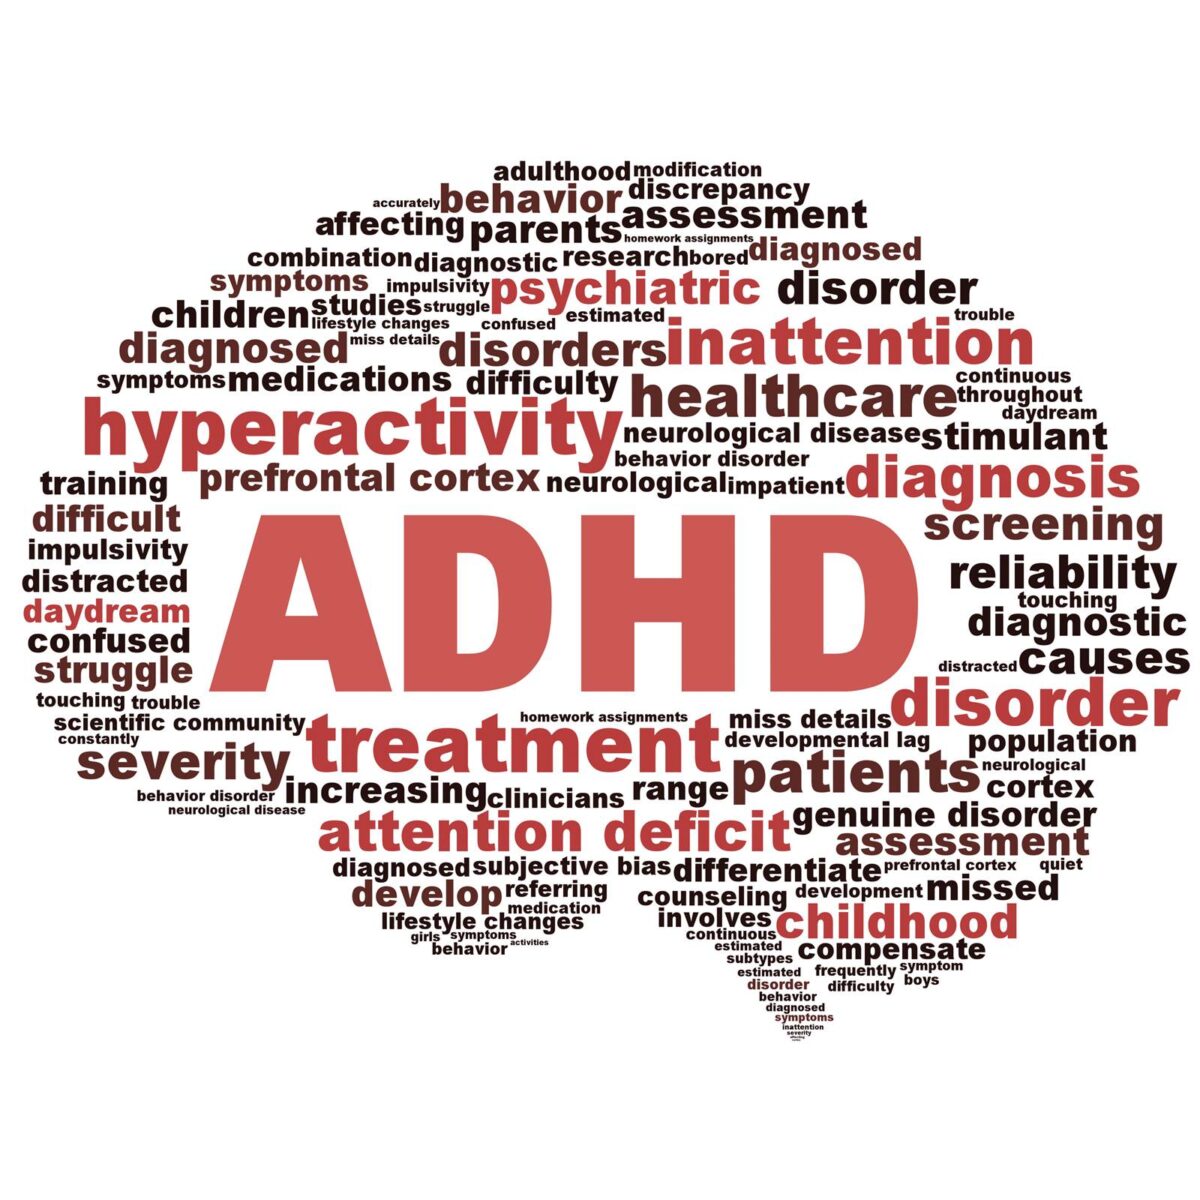 Parenting Teens with ADHD: Supportive Approaches